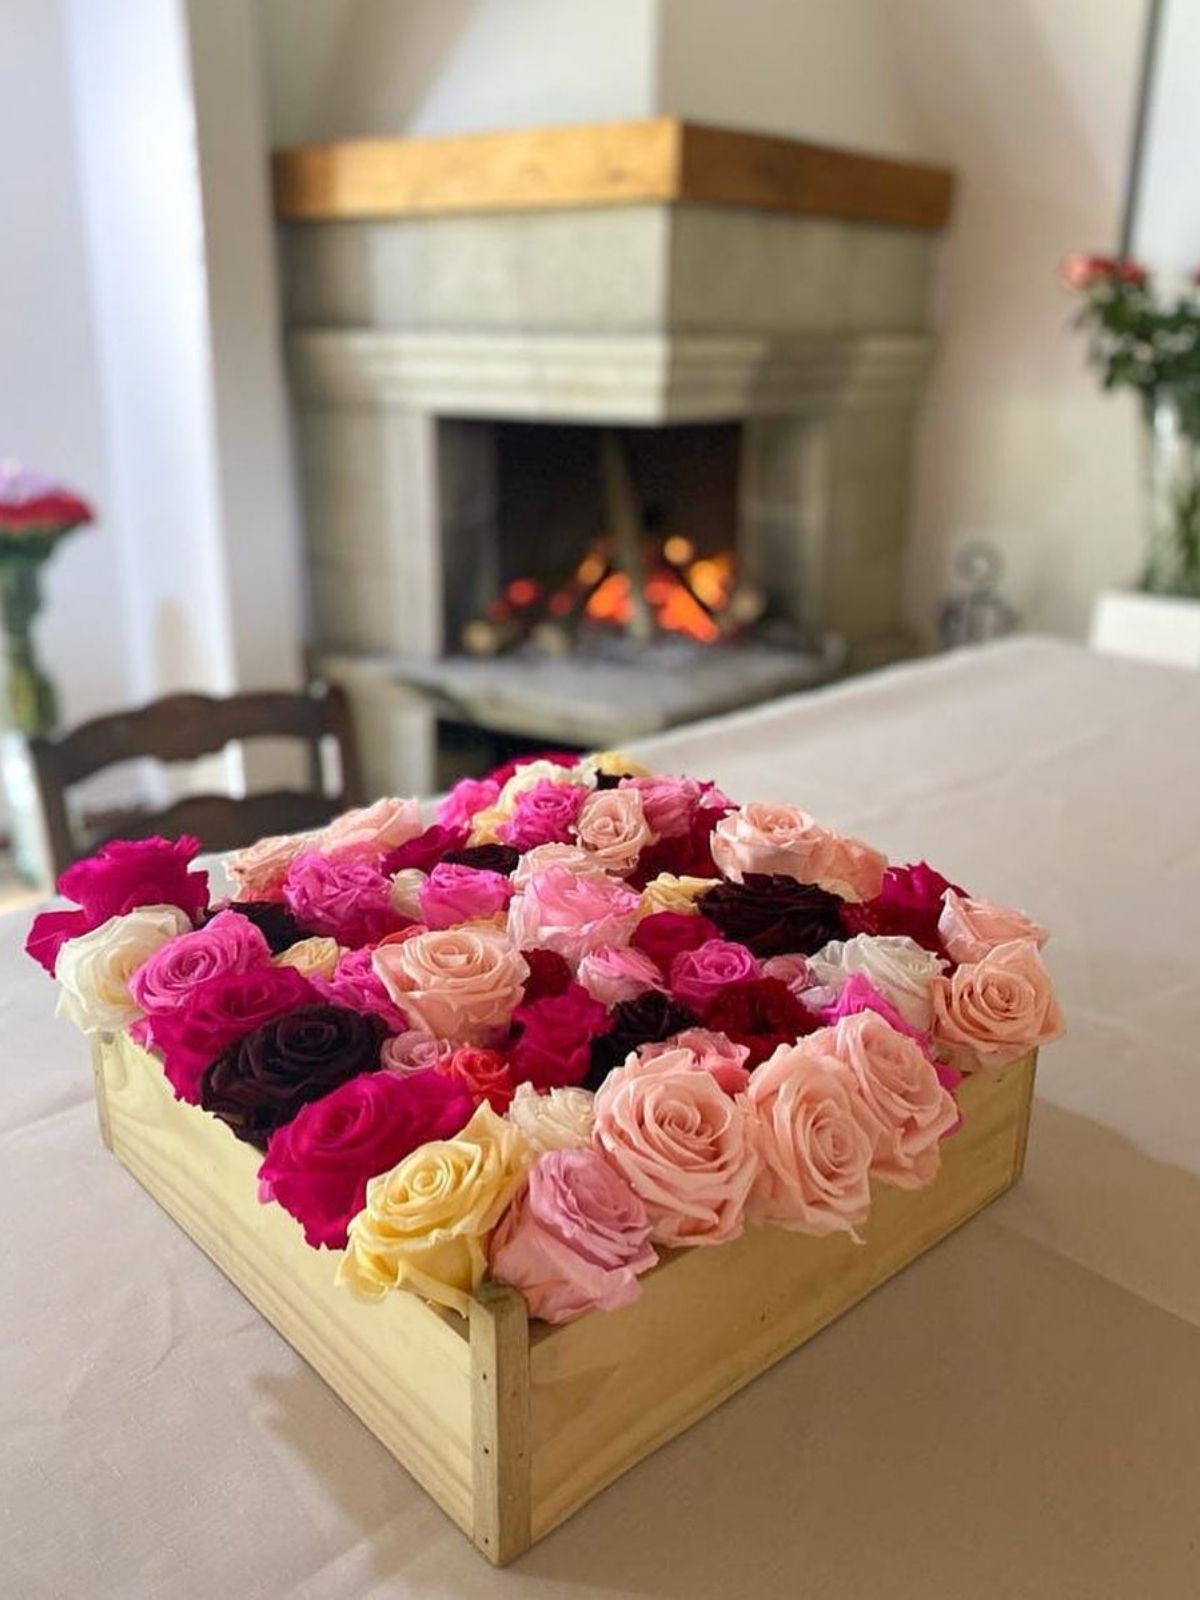 Benefits and Uses of Preserved Roses for Interior Decoration - Atix Home interior designer - naranjo roses - preserved roses in box - article on thursd